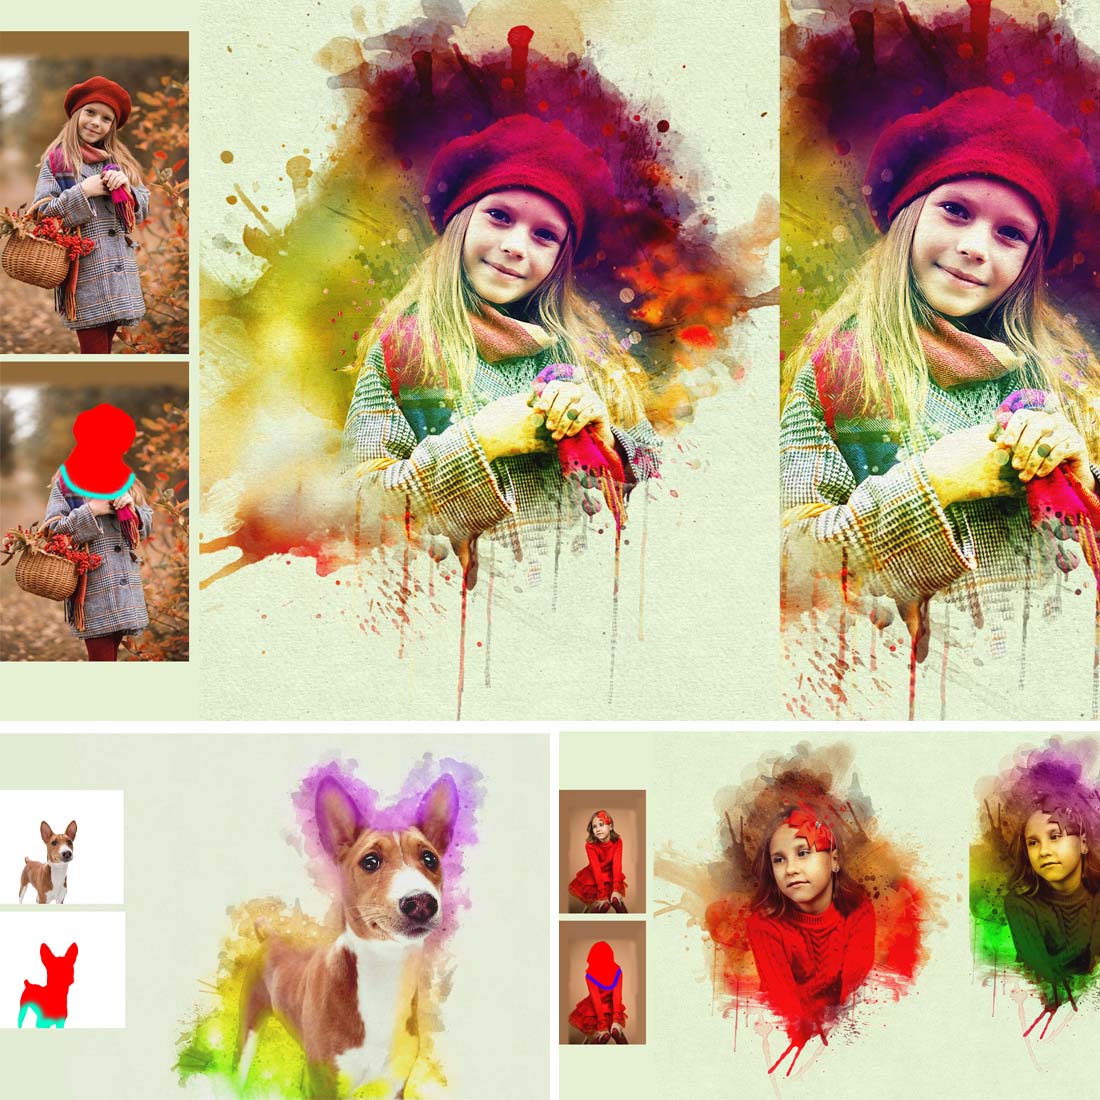 Splatter Dripping Portrait Art Photoshop Actions cover image.